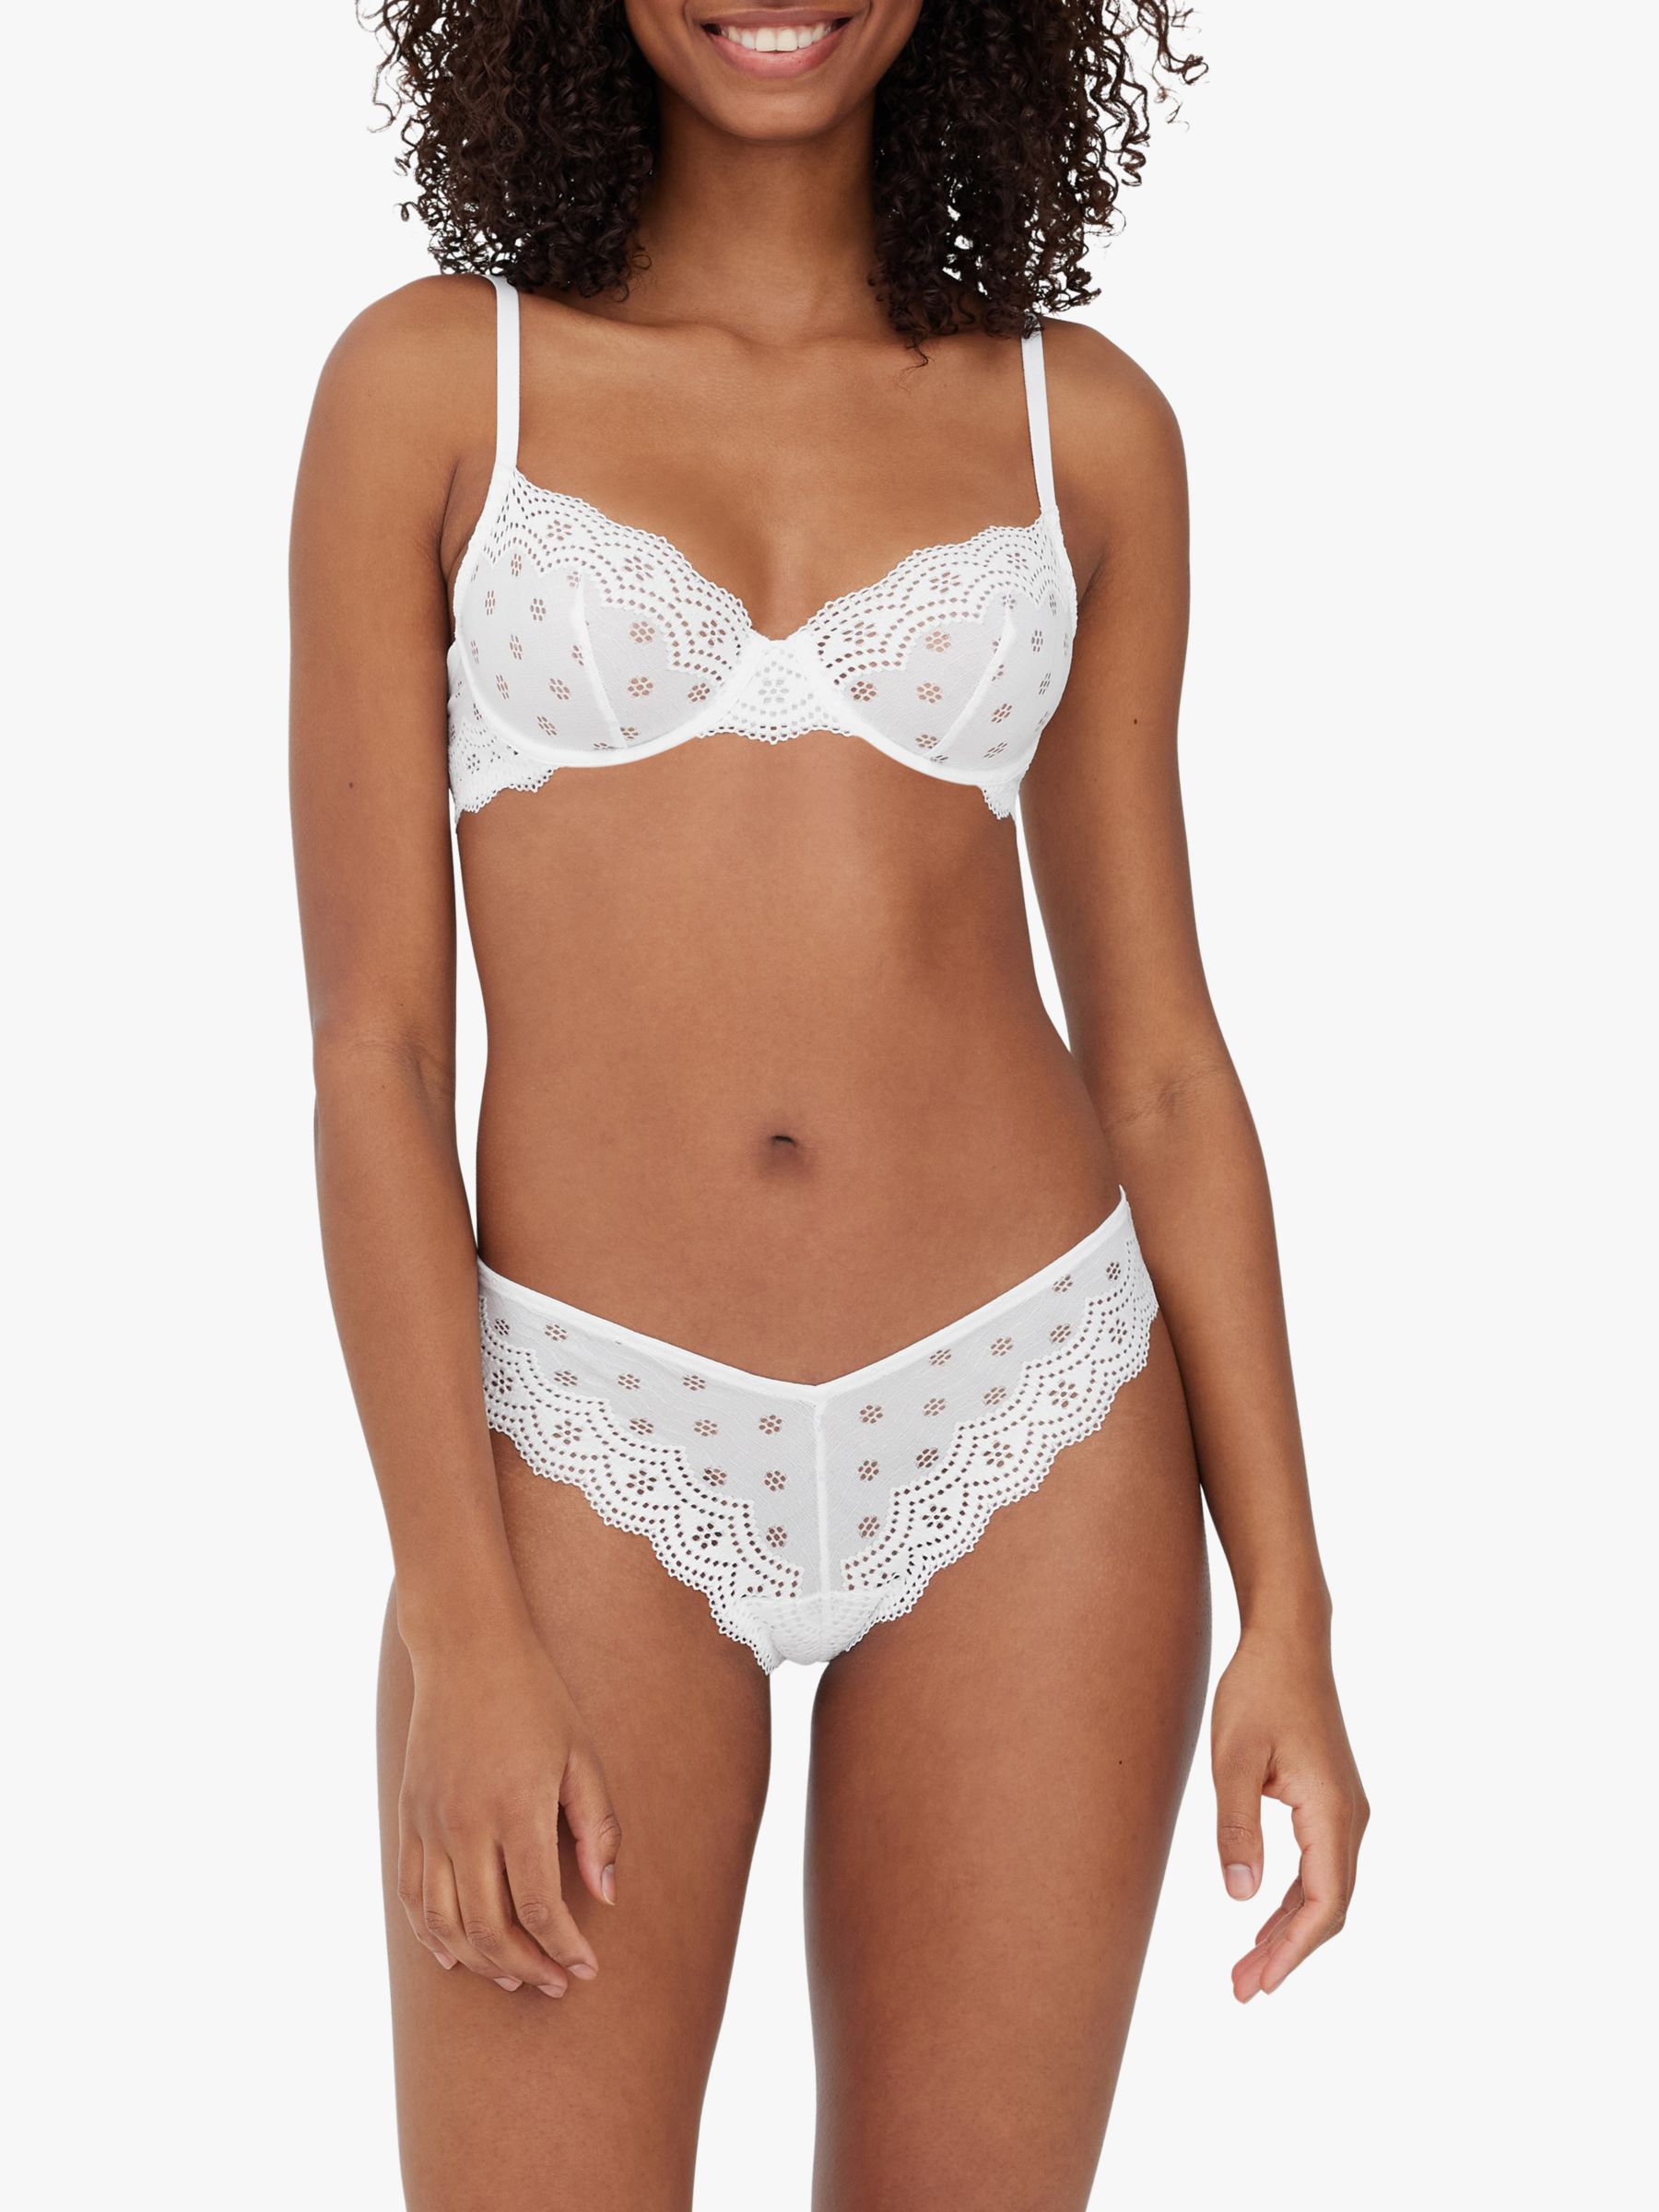 Eyelet Lace Collection  Stretch Lace Bras, Thongs, and Briefs